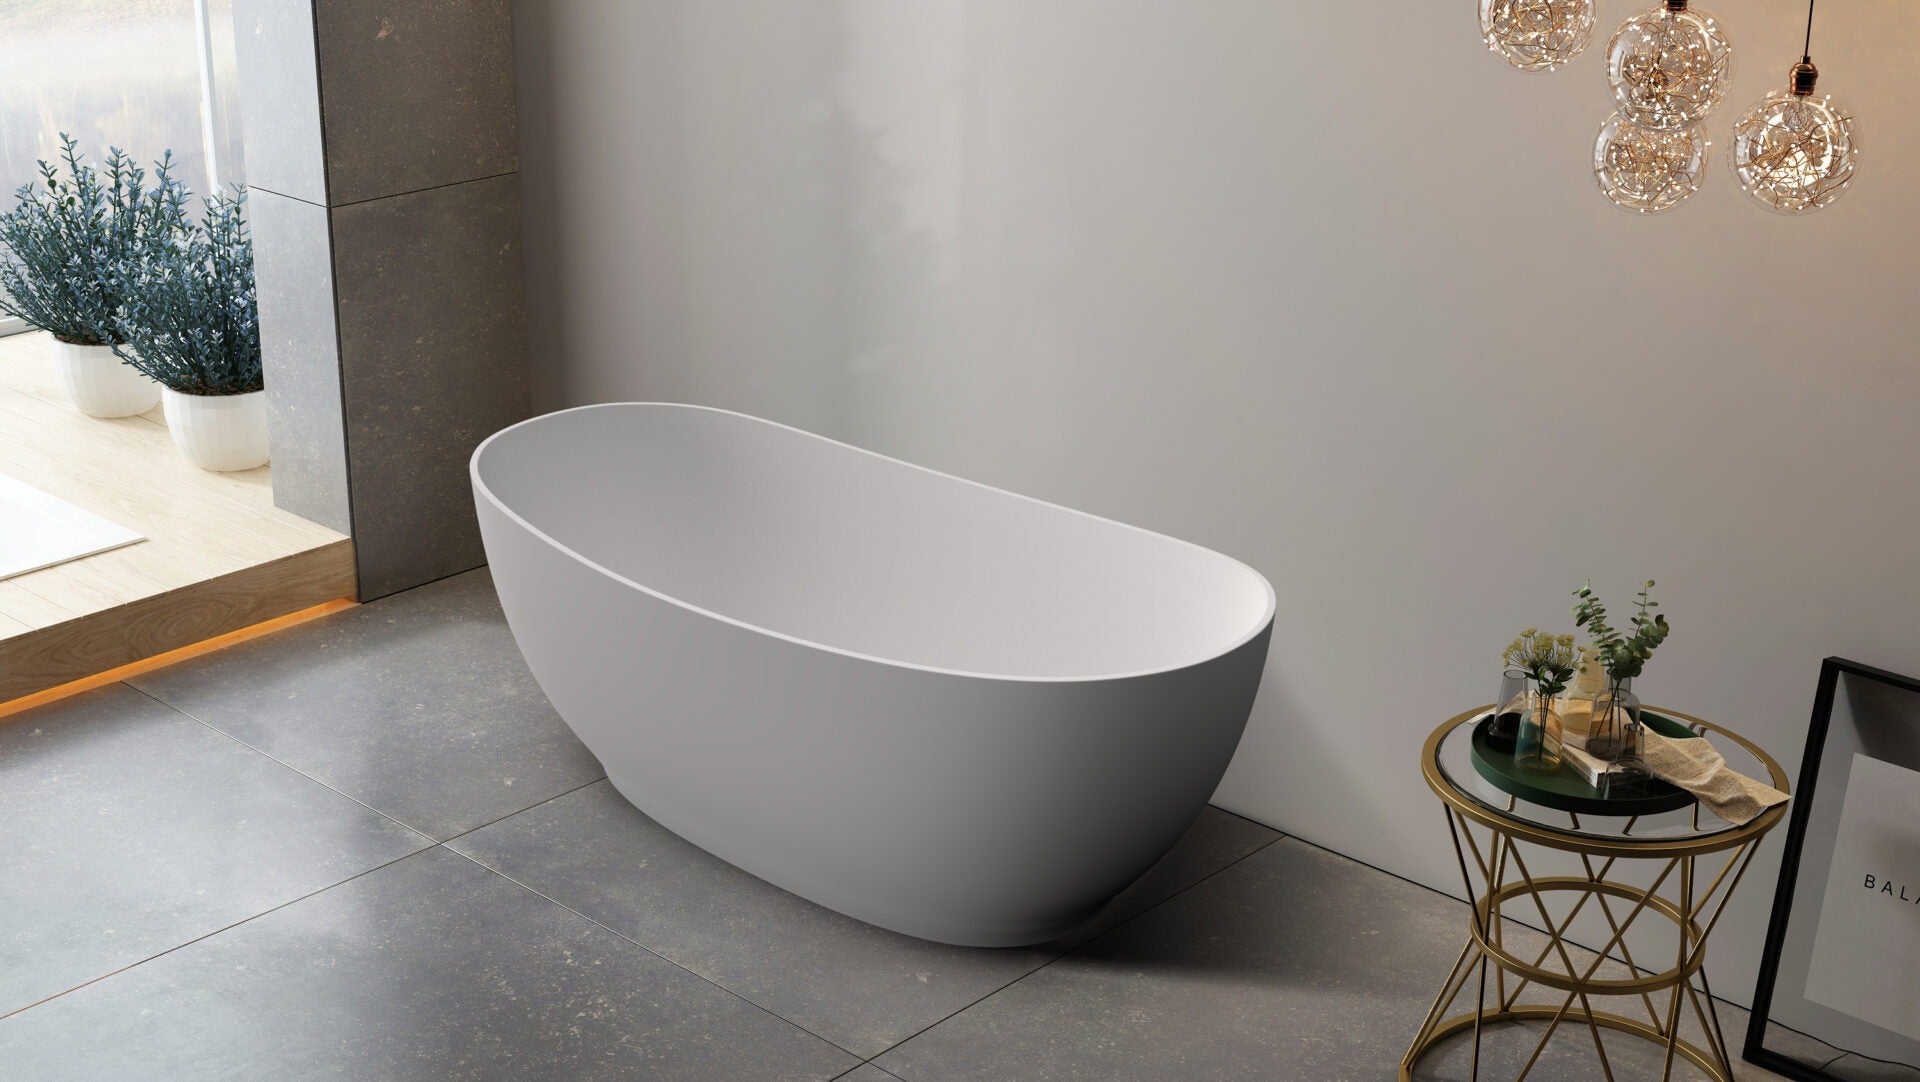 RIVA LAYLA SUPER SLIM EDGE FREESTANDING BATHTUB MATTE WHITE (AVAILABLE IN 1500MM AND 1700MM)